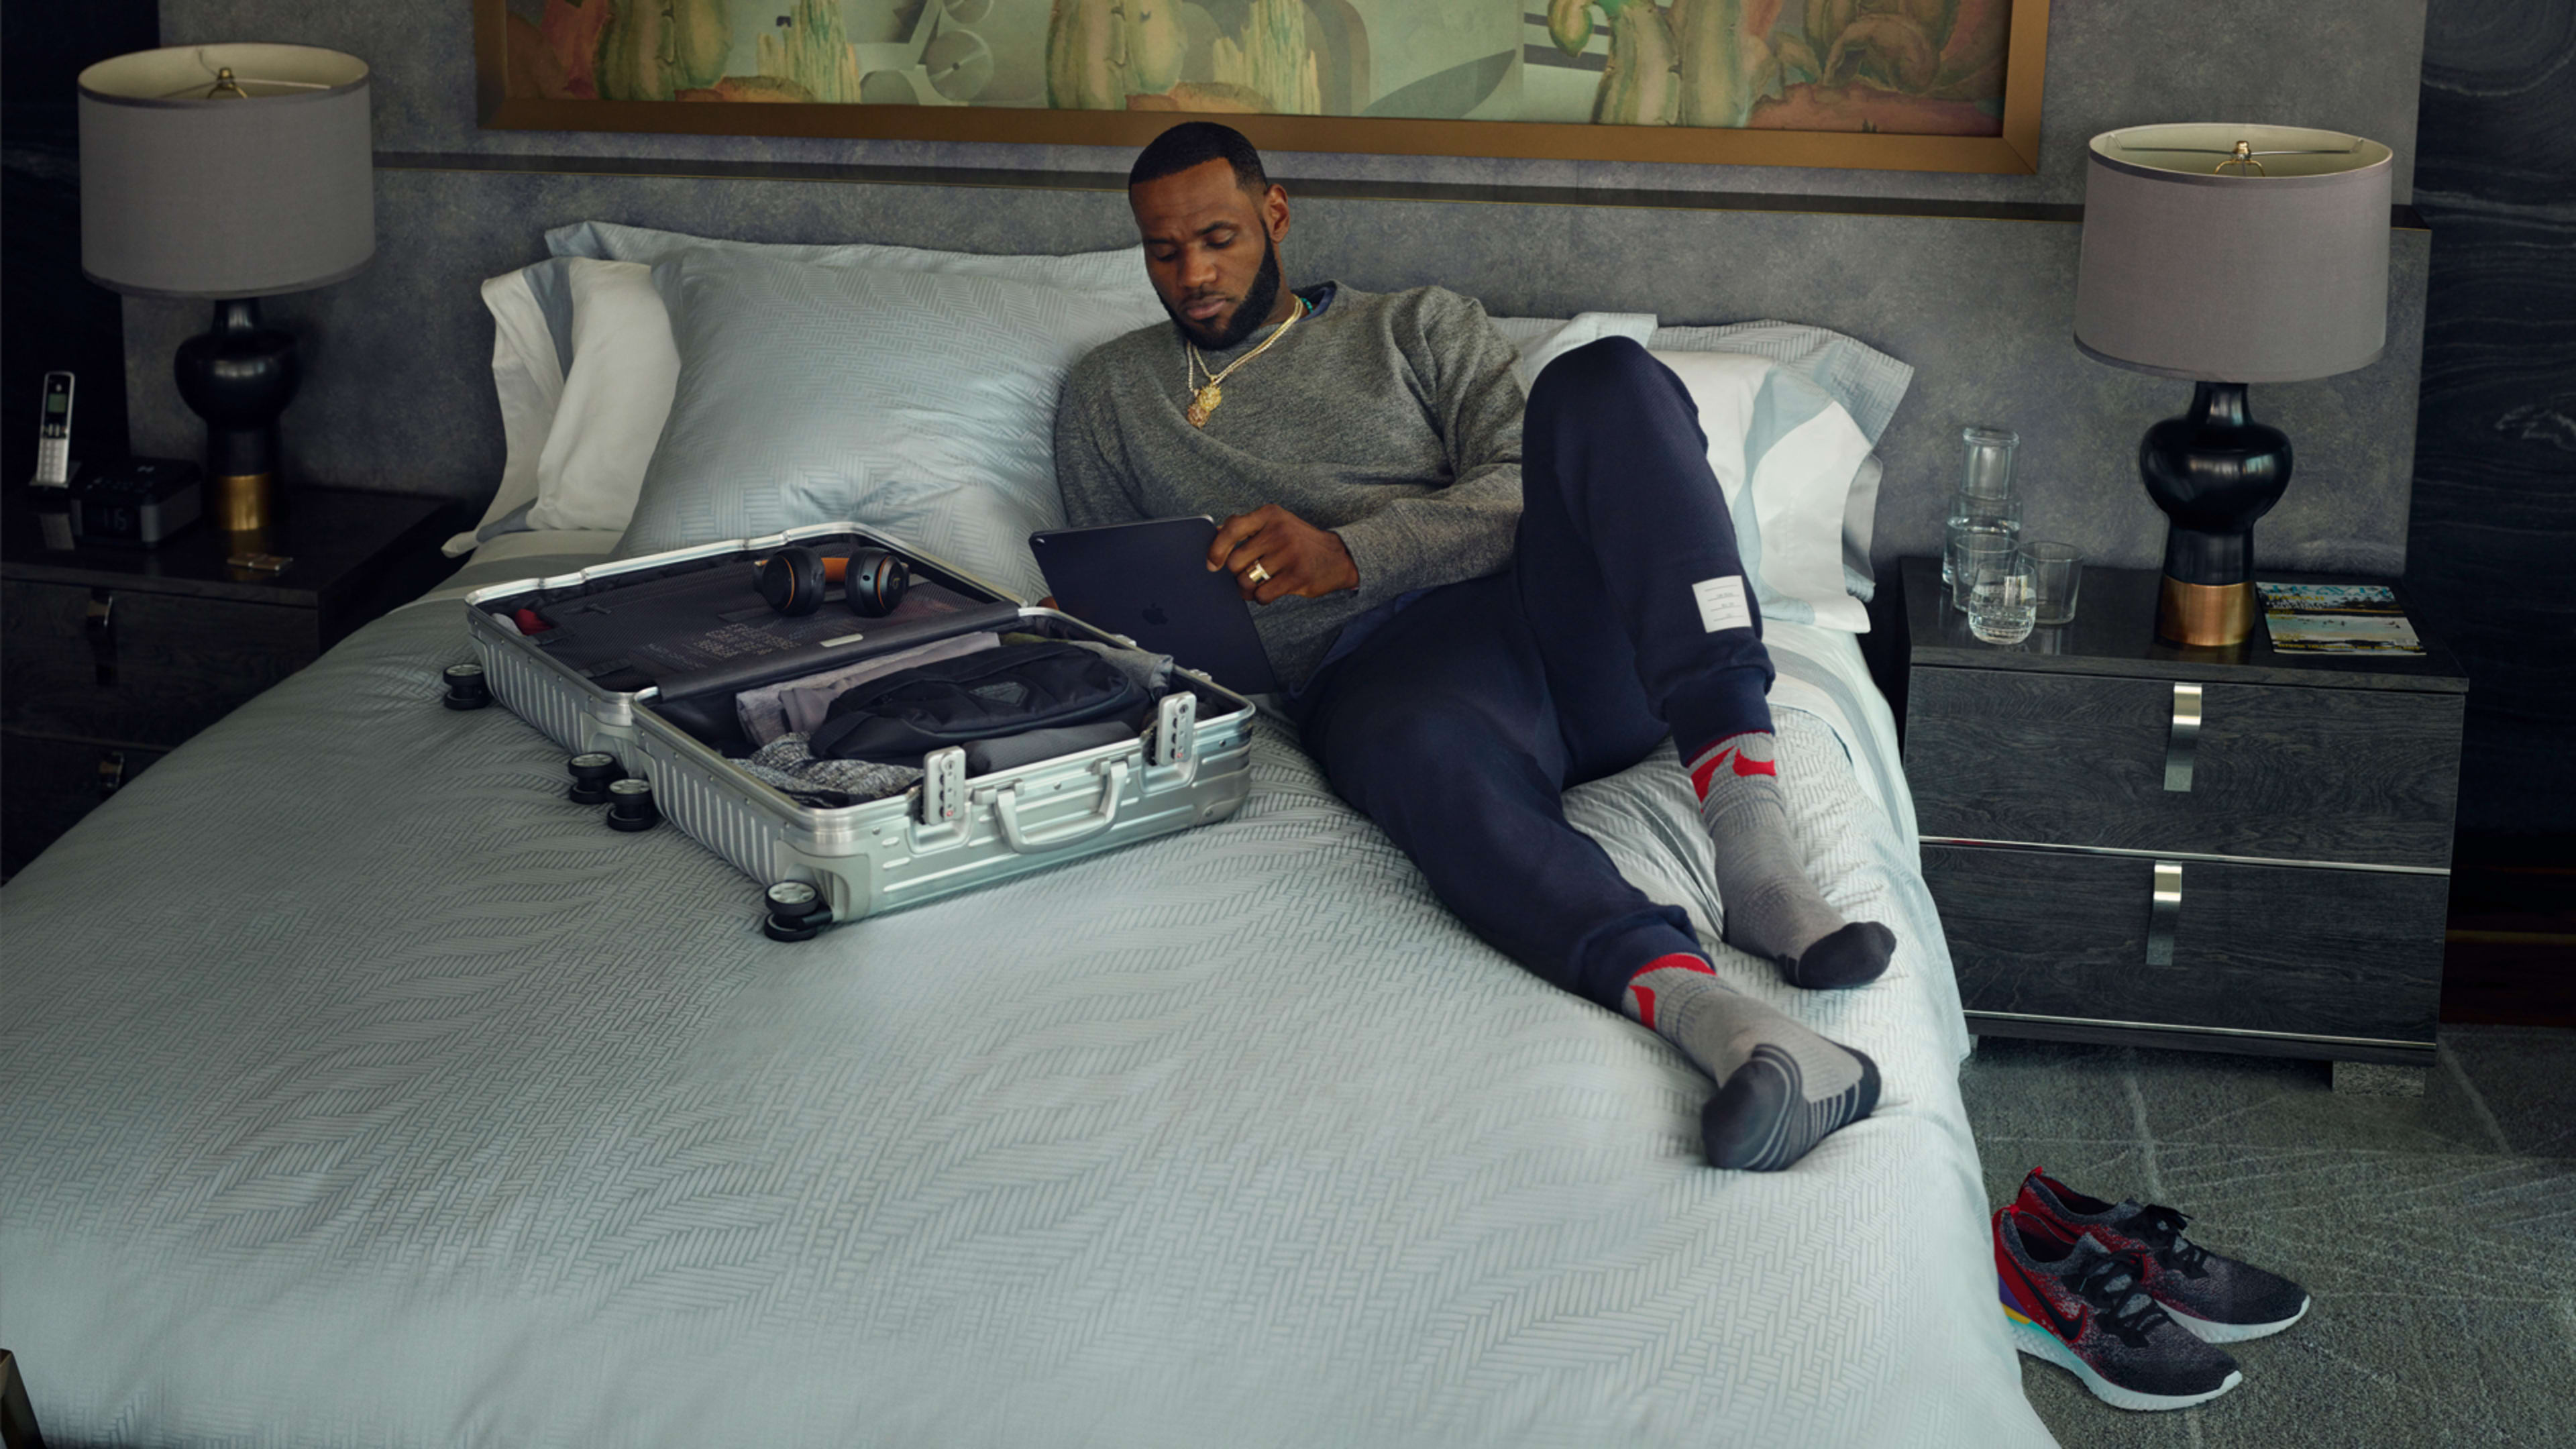 LeBron James doesn’t need to endorse anything. Here’s why he’s promoting this luxury luggage brand